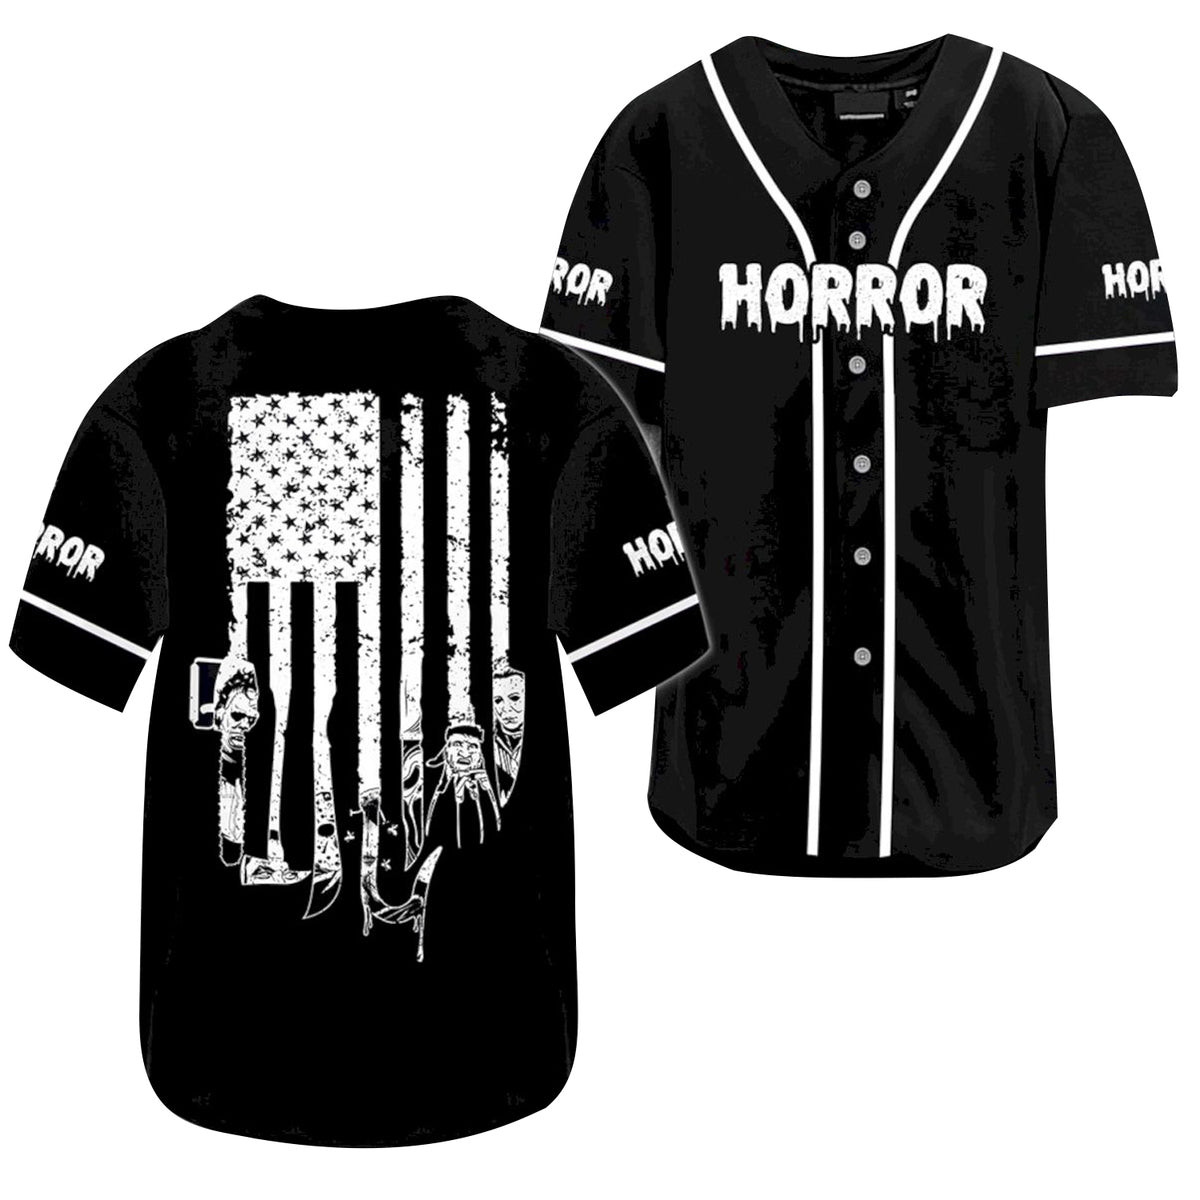 Horror Characters Movies Friends Black And White Baseball Jersey, Unisex Baseball Jersey for Men Women